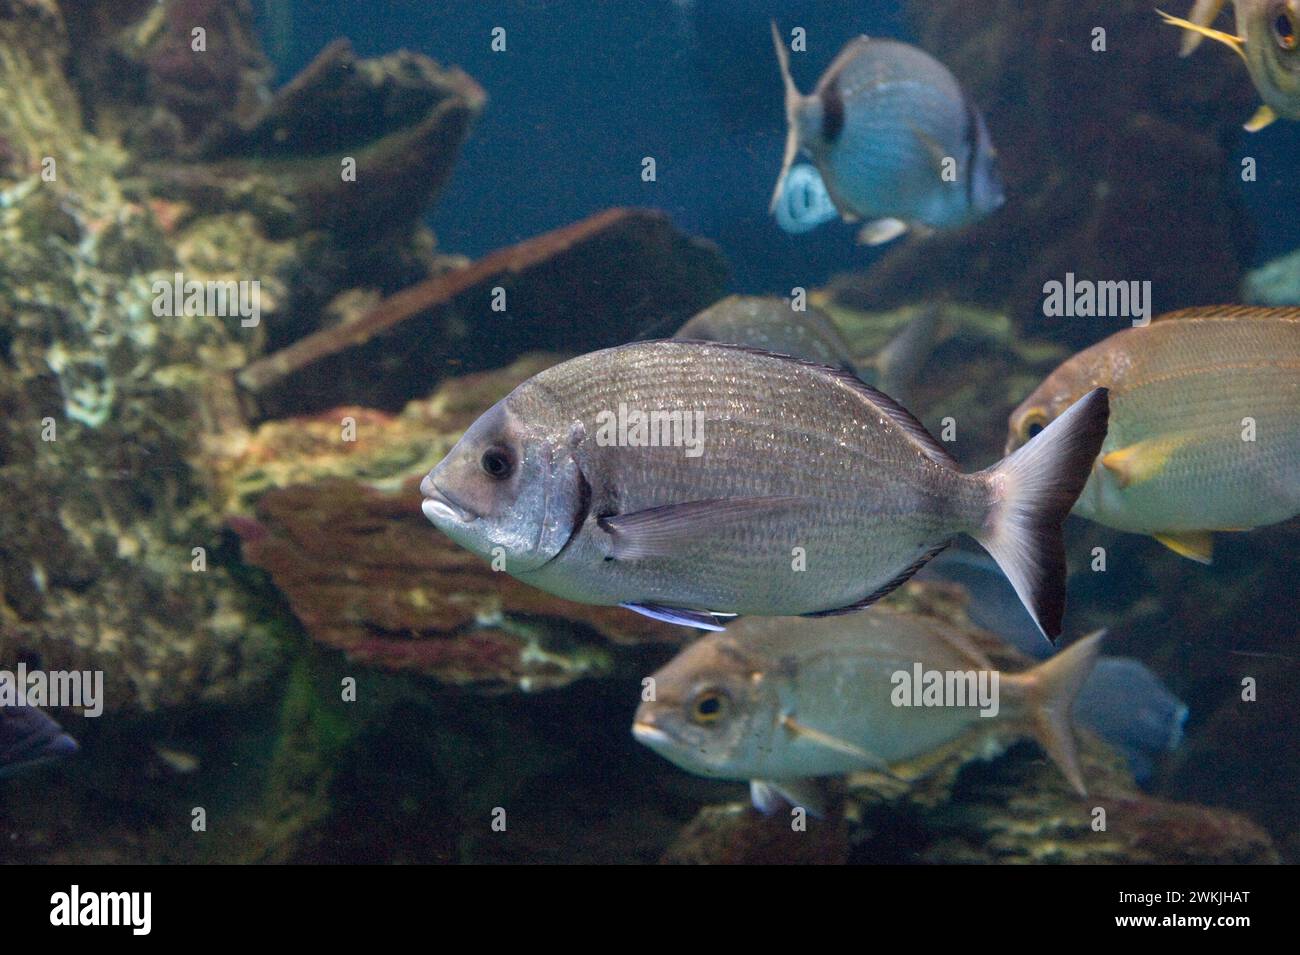 Sargo or white seabream (Diplodus sargus) is an omnivorous marine fish native to Mediterranean Sean and coastal of east Atlantic Ocean, from France to Stock Photo